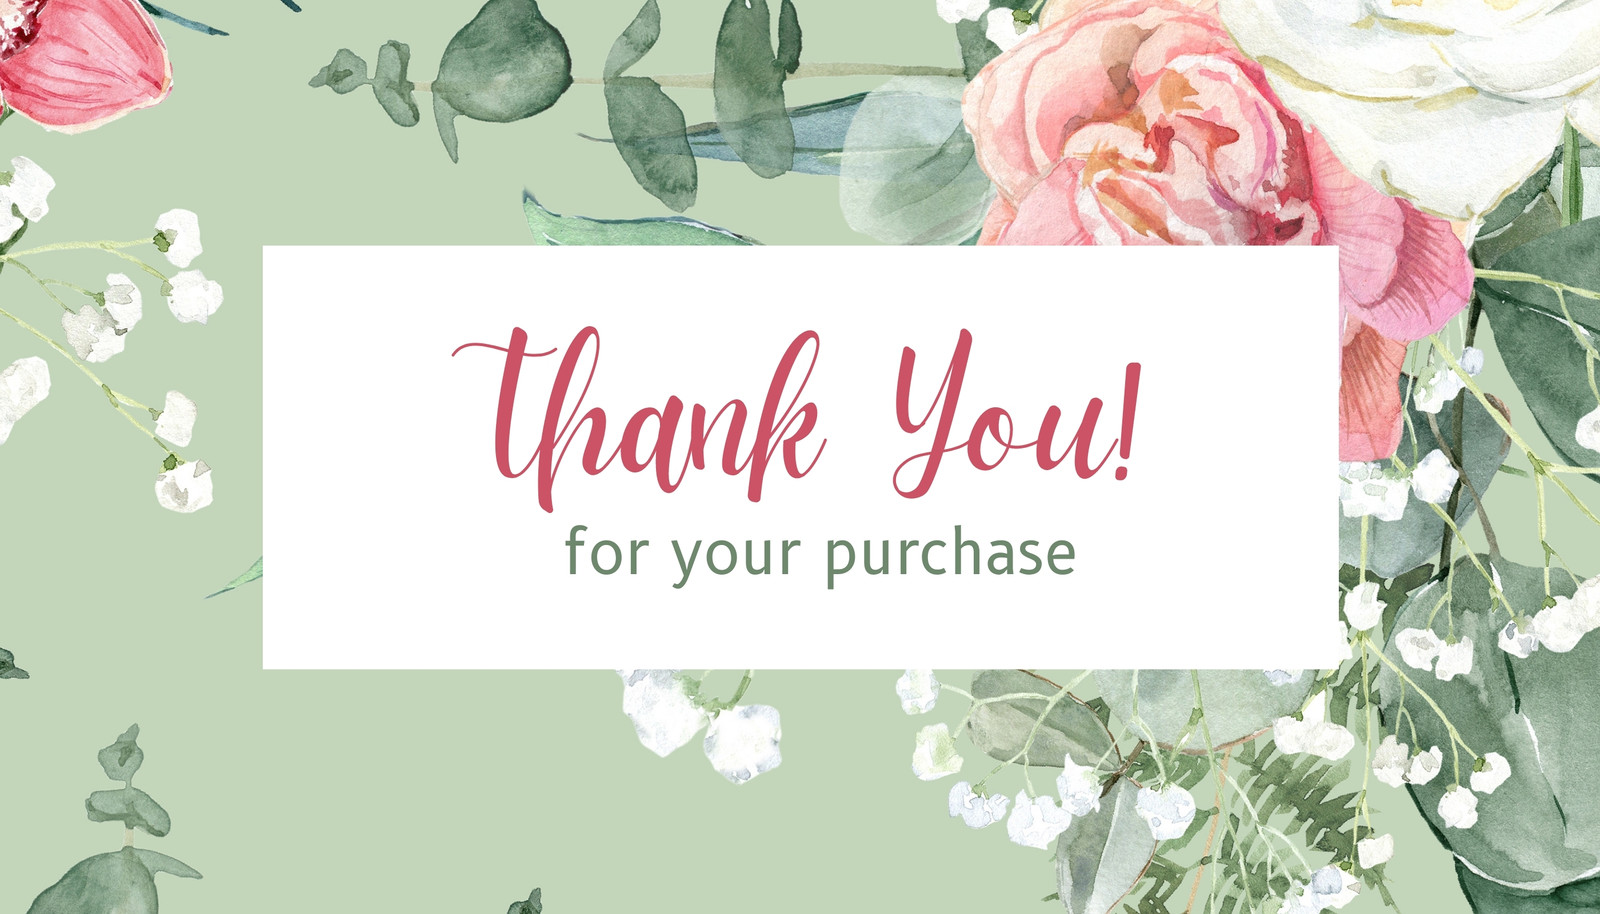 Personalized Gift Tags  Blush Pink Rose Thank You Gift Tags